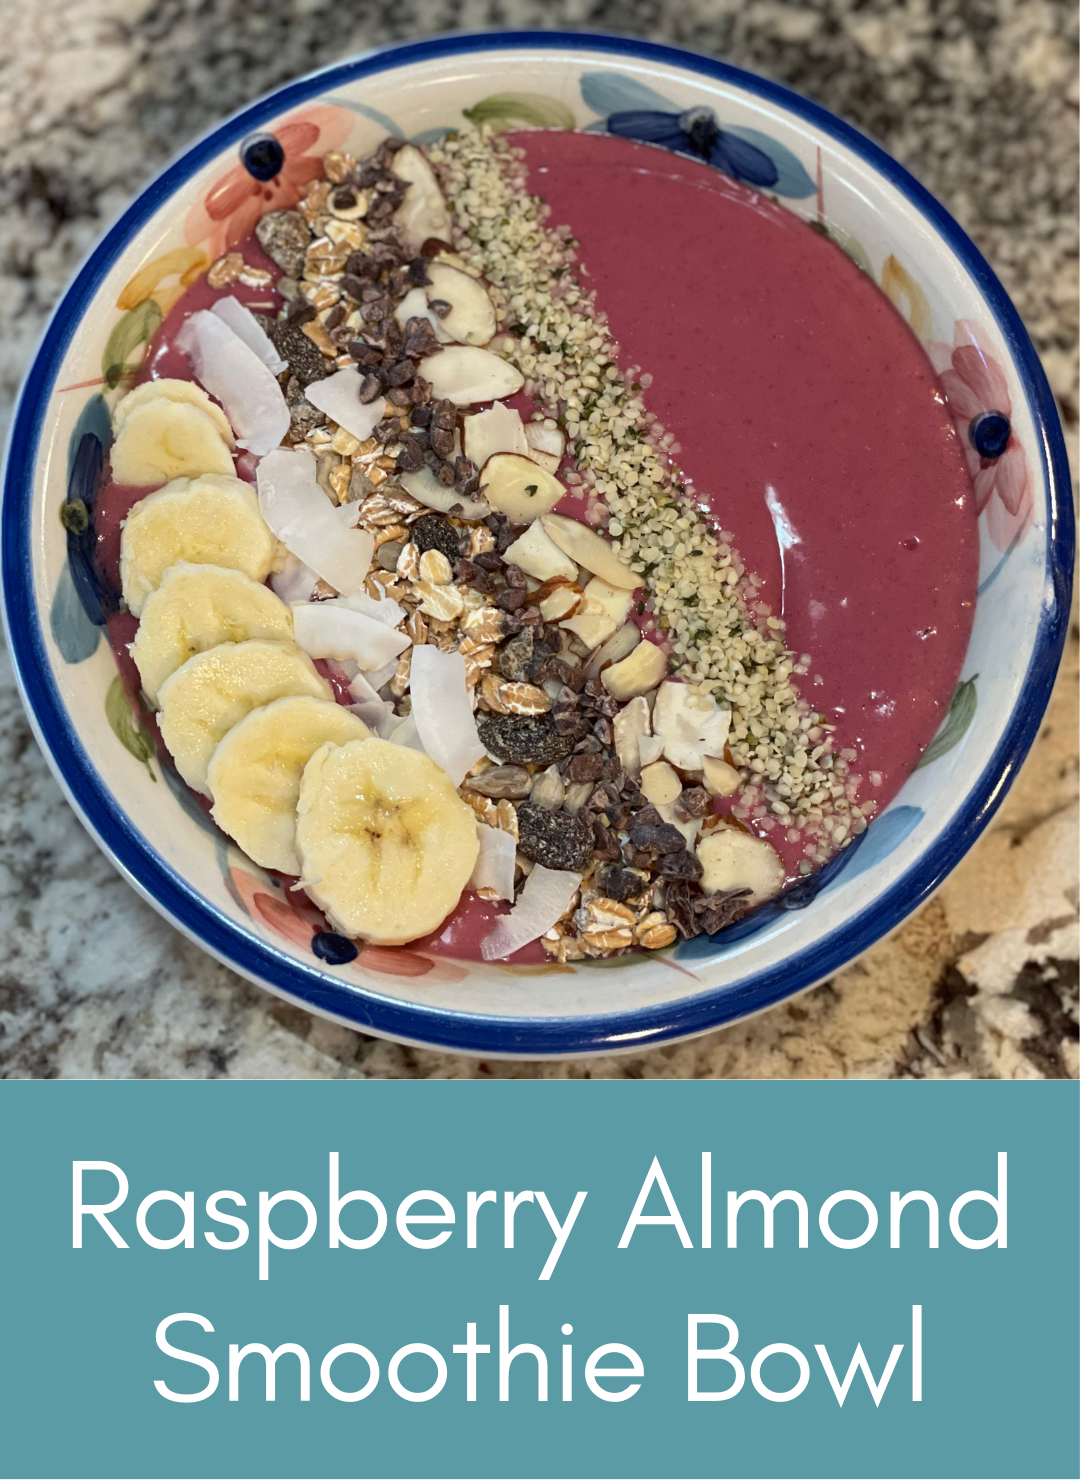 Raspberry almond plant based whole food vegan smoothie in a bowl Picture with link to recipe